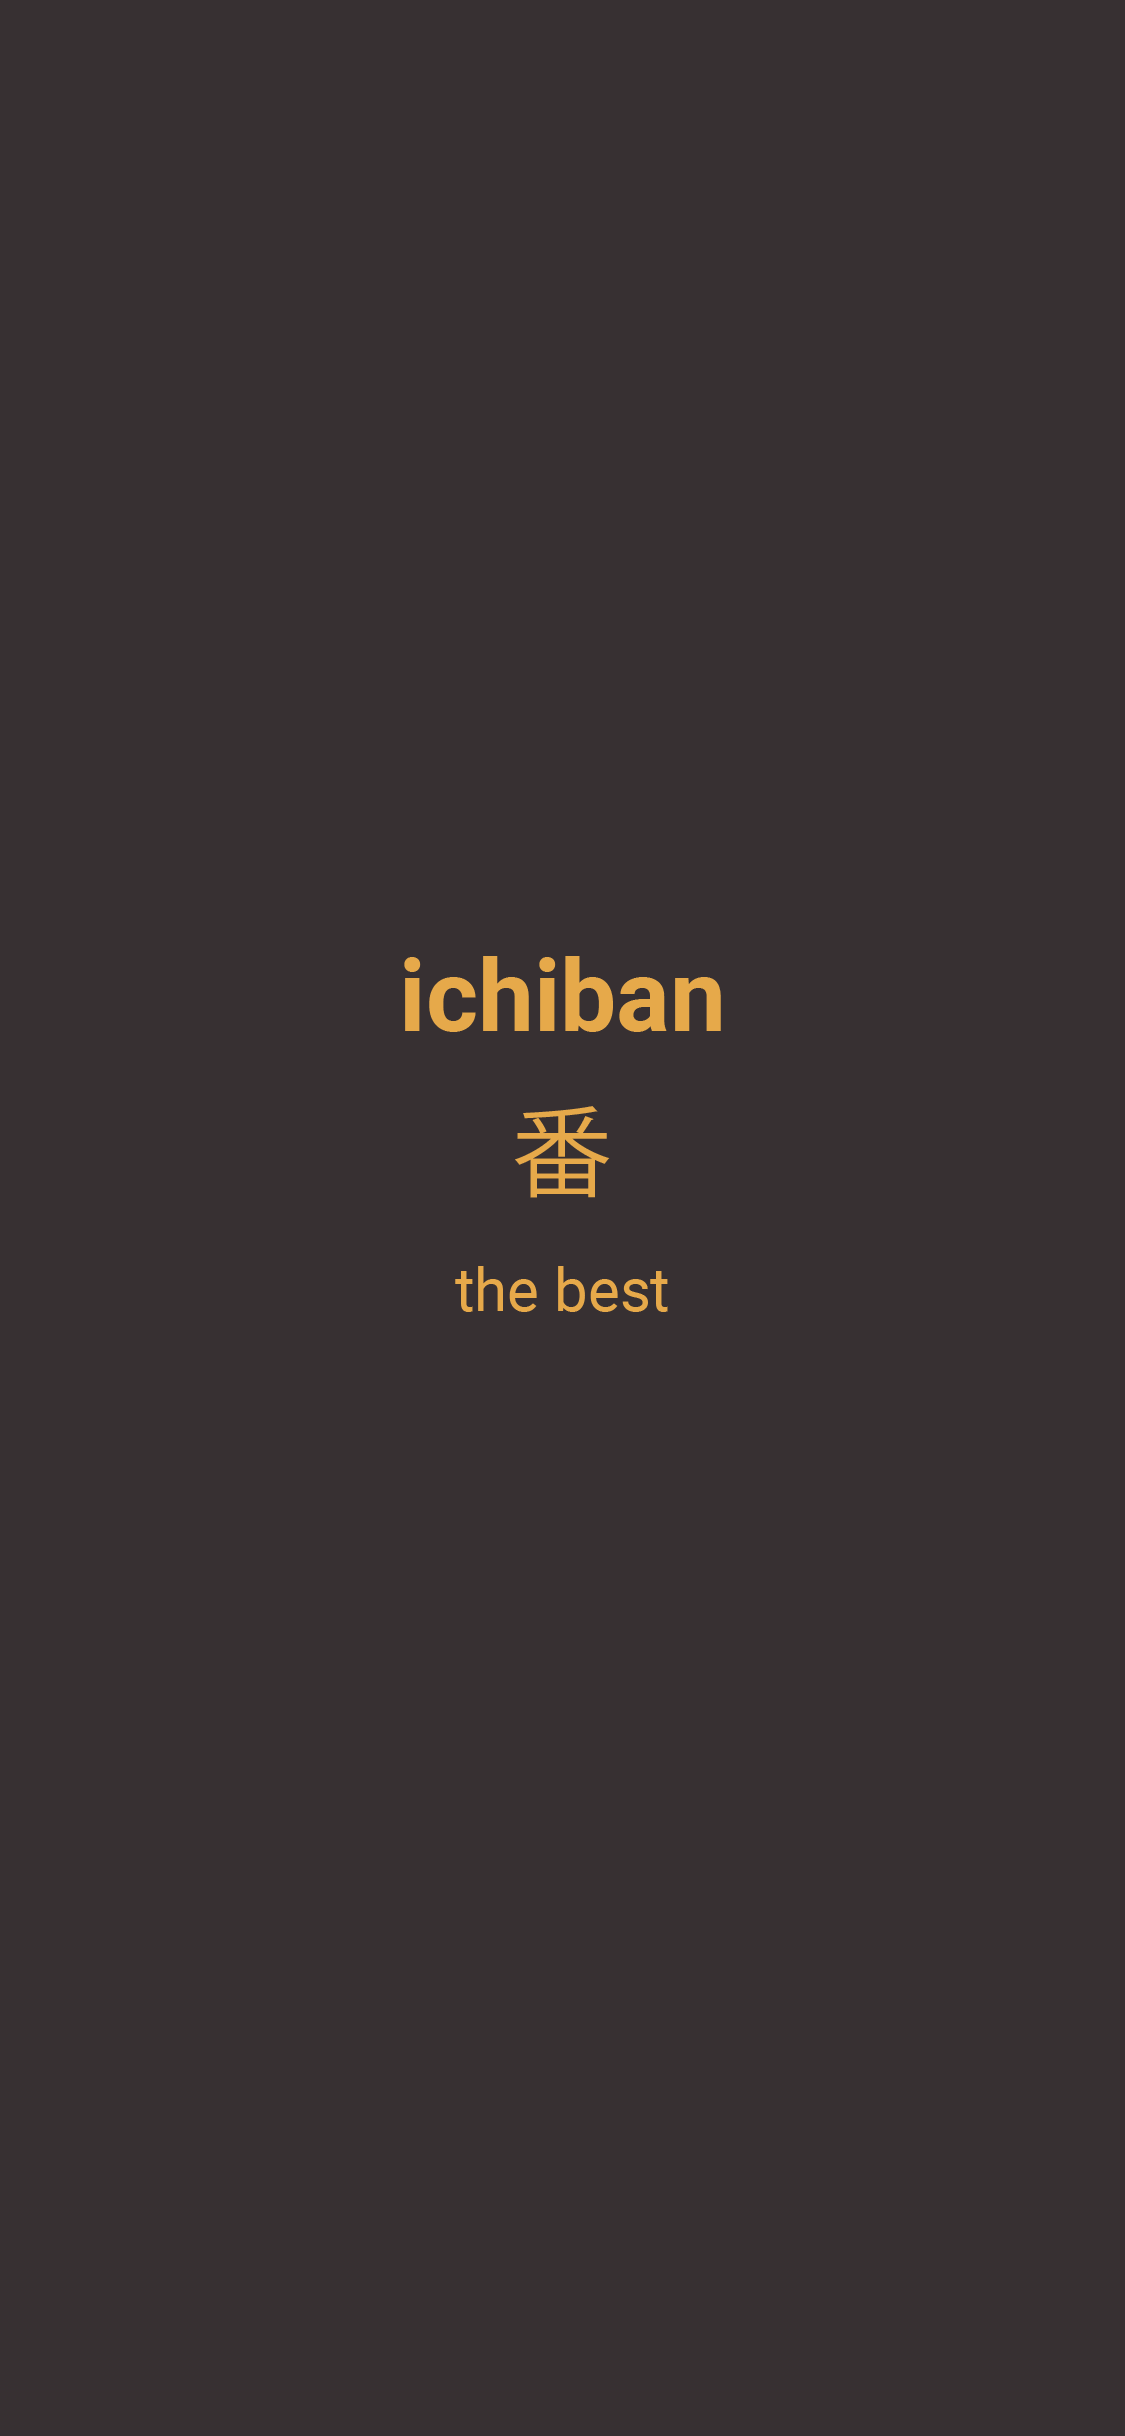 ichiban // 番 // the best. Cool background for iphone, iPhone background wallpaper, iPhone background